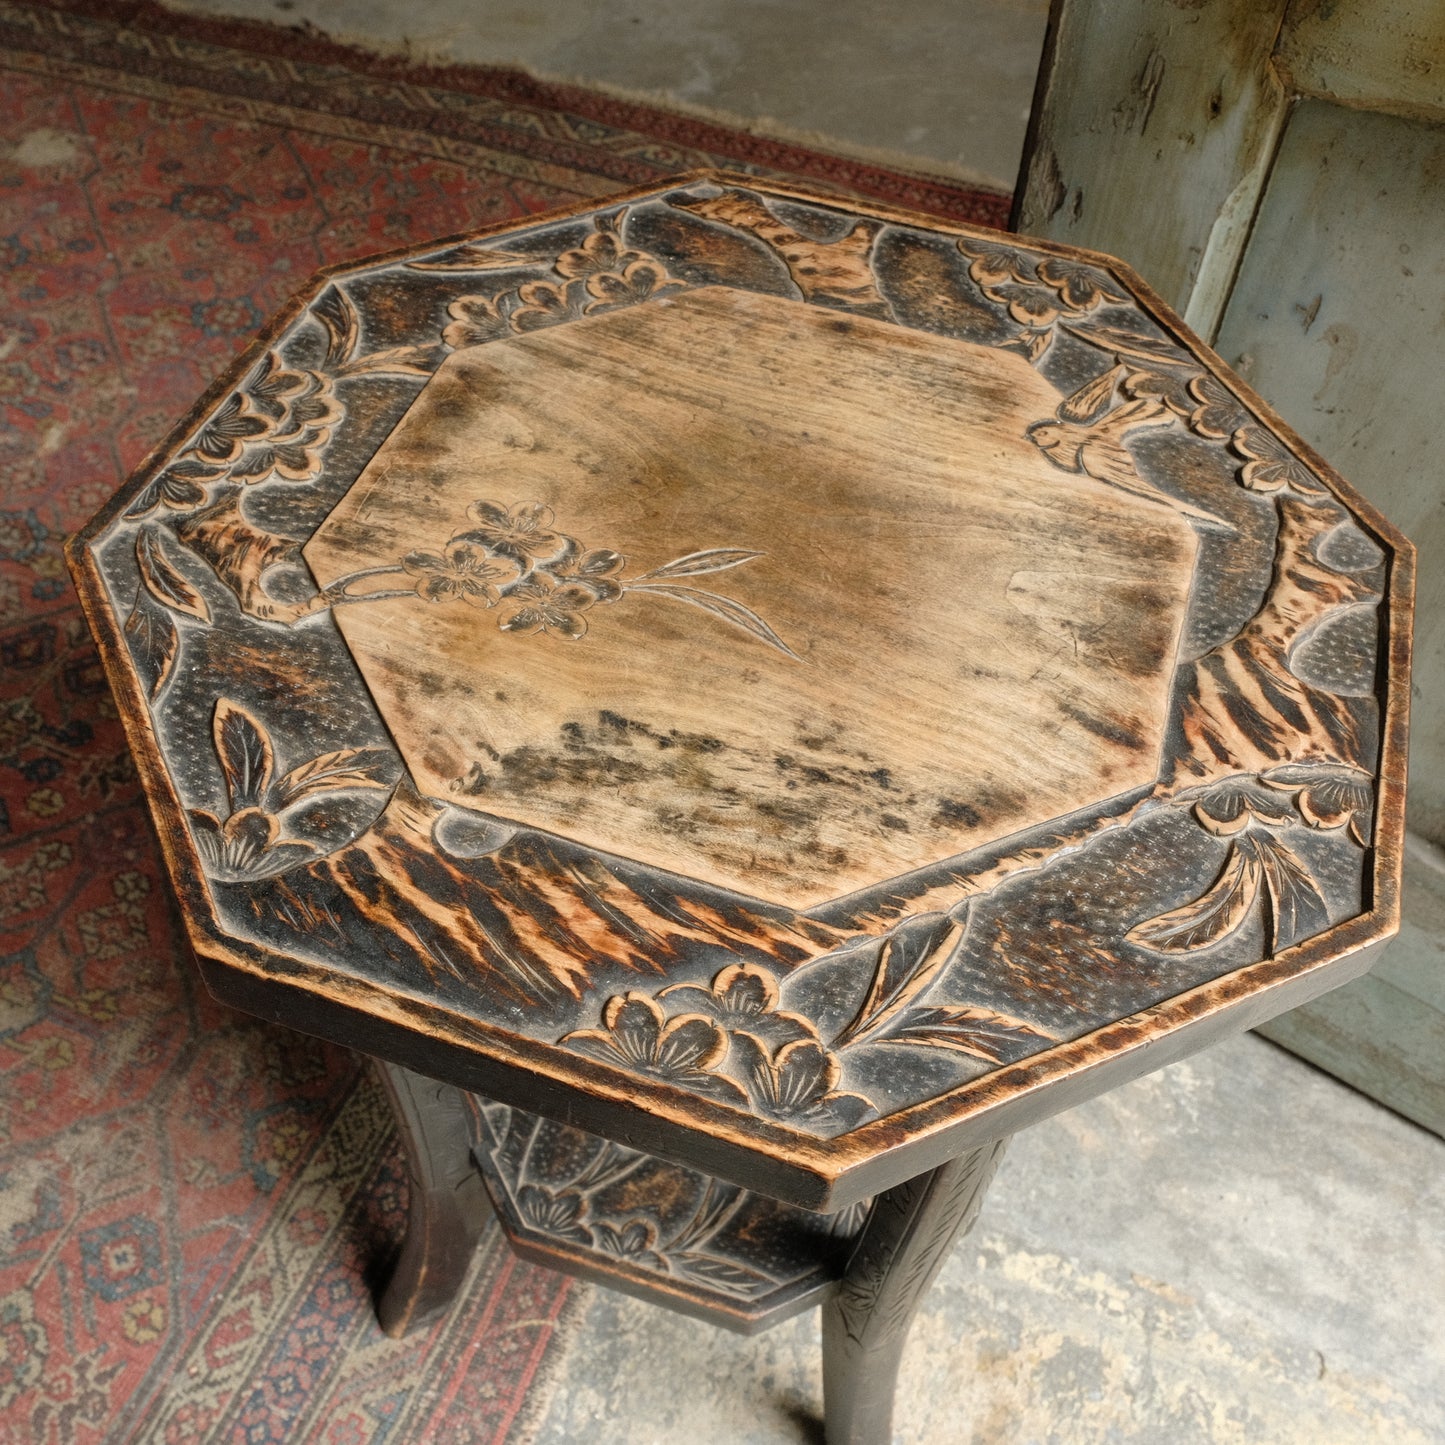 Octagonal Liberty Table with Birds